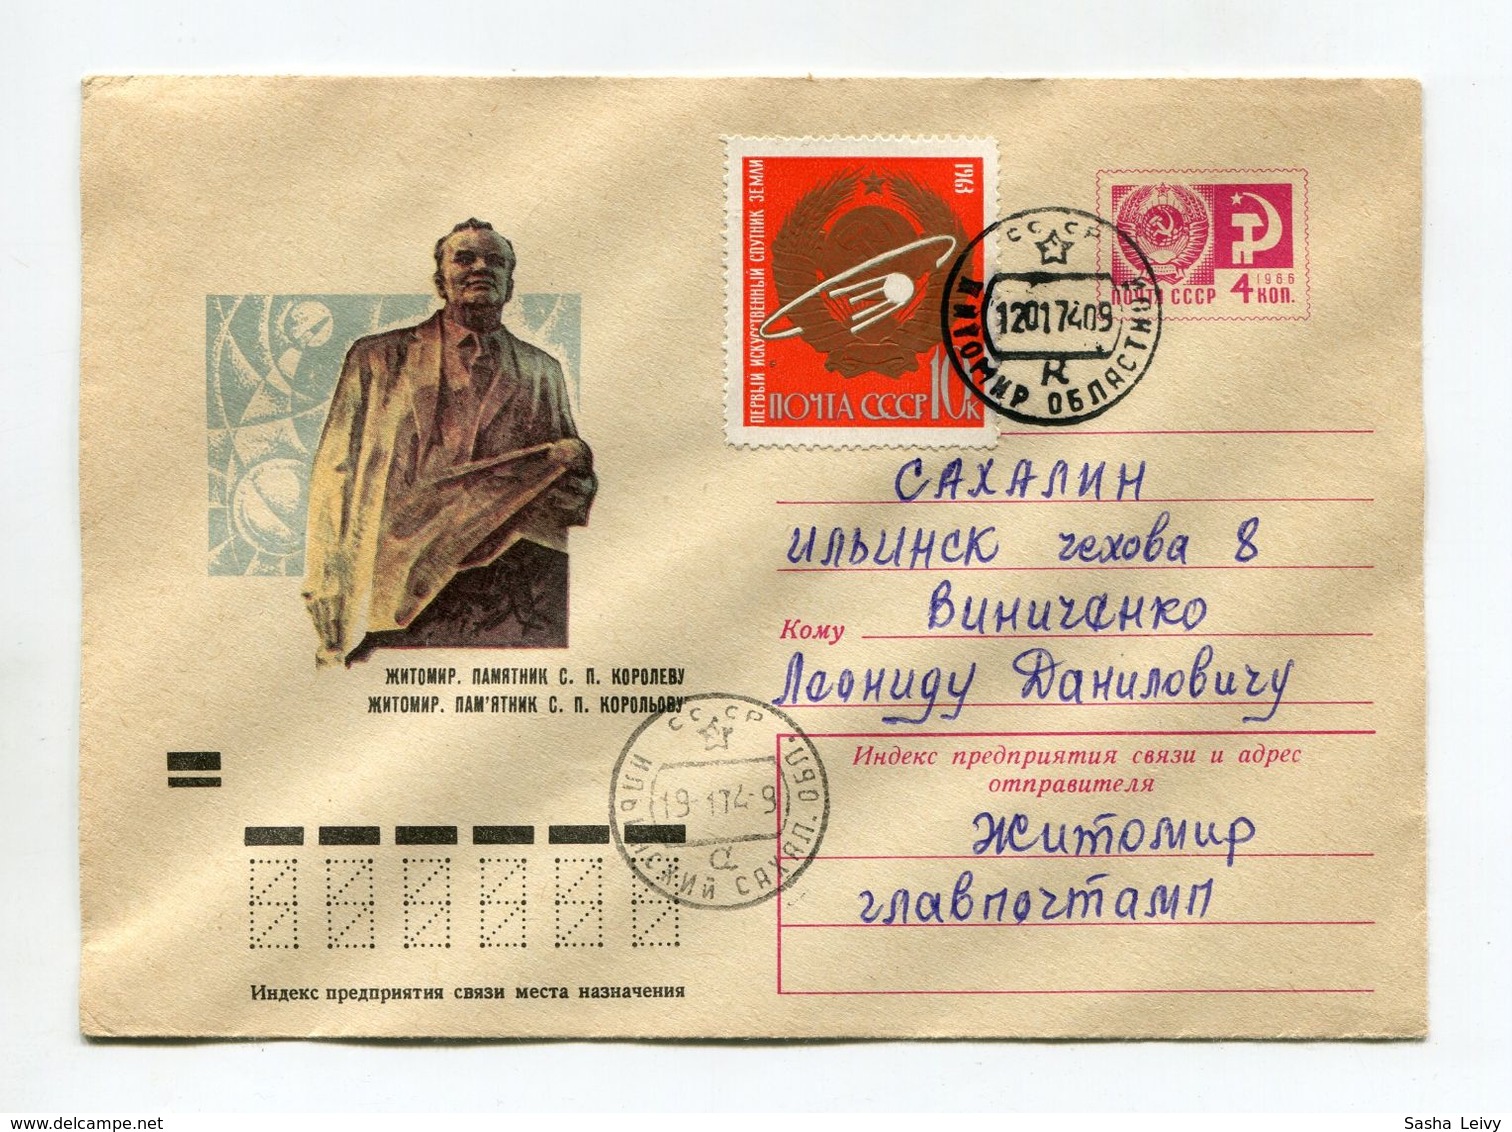 SPACE COVER USSR 1973 ZHITOMIR S.P.KOROLEV MONUMENT #73-458 ZHITOMIR-SAKHALIN - Russia & USSR